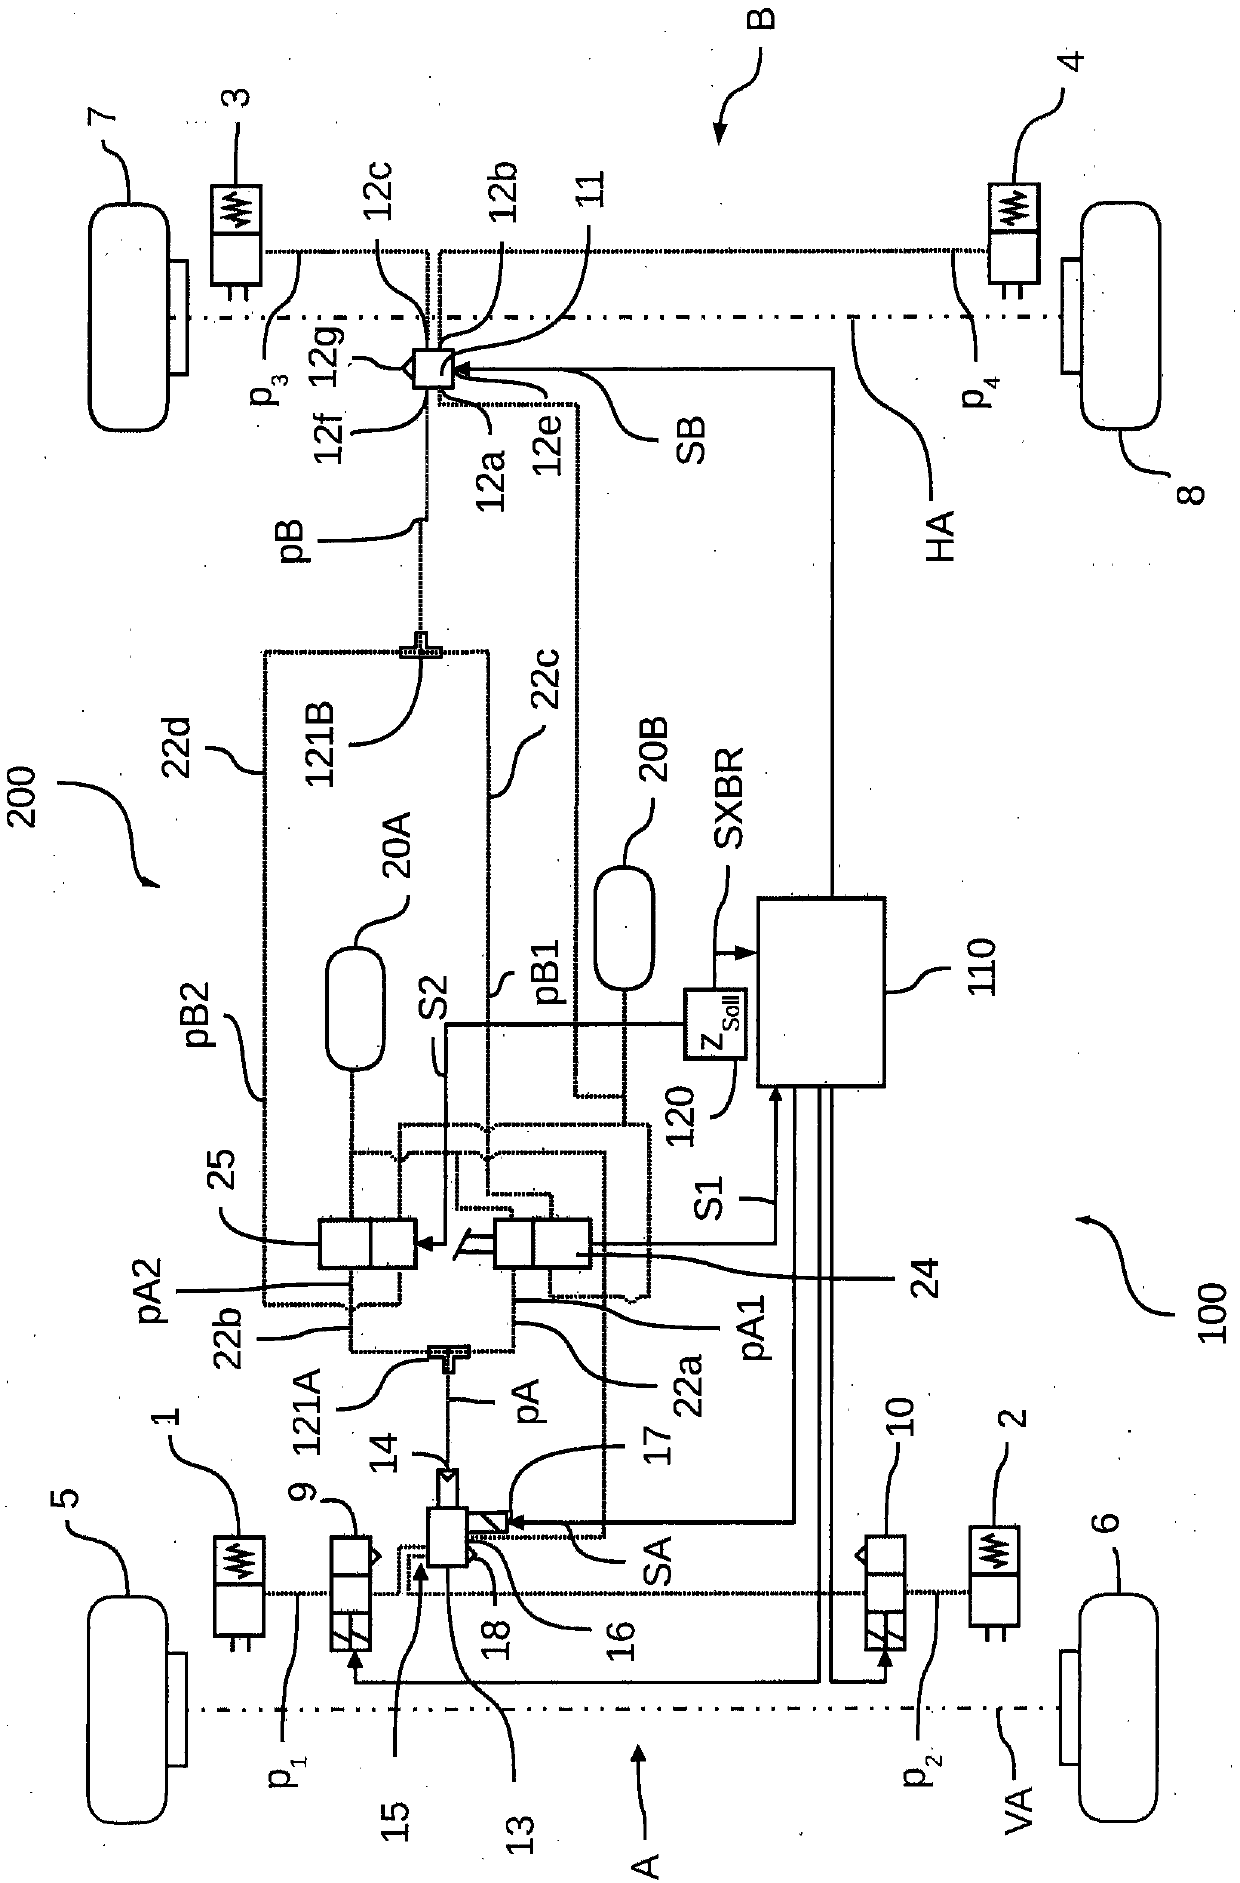 Electronically controlled pneumatic braking system in a commercial vehicle, and method for electronically controlling a pneumatic braking system